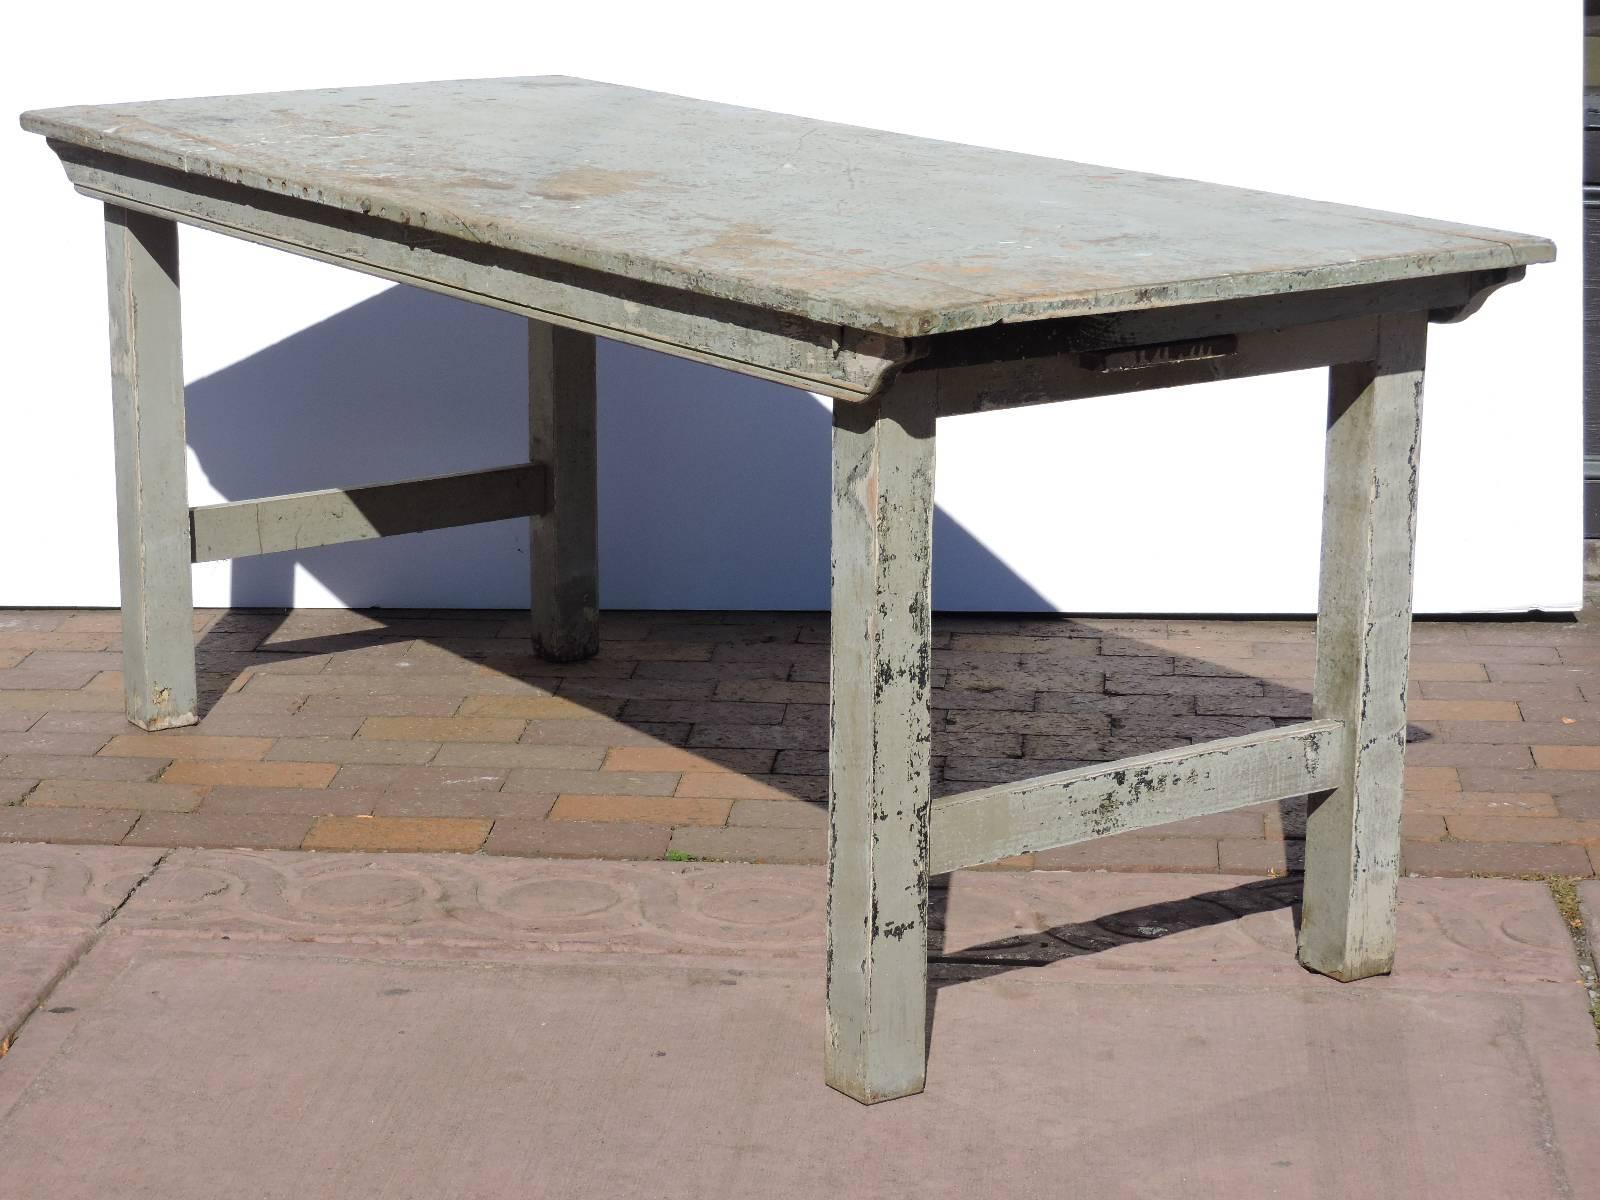 All original antique collapsible folding leg wood dining farm table/work table in aged worn distressed very pale robins egg blue painted surface with a number of small holes to top and some rivet bolts on sides - apparently used for many years as a